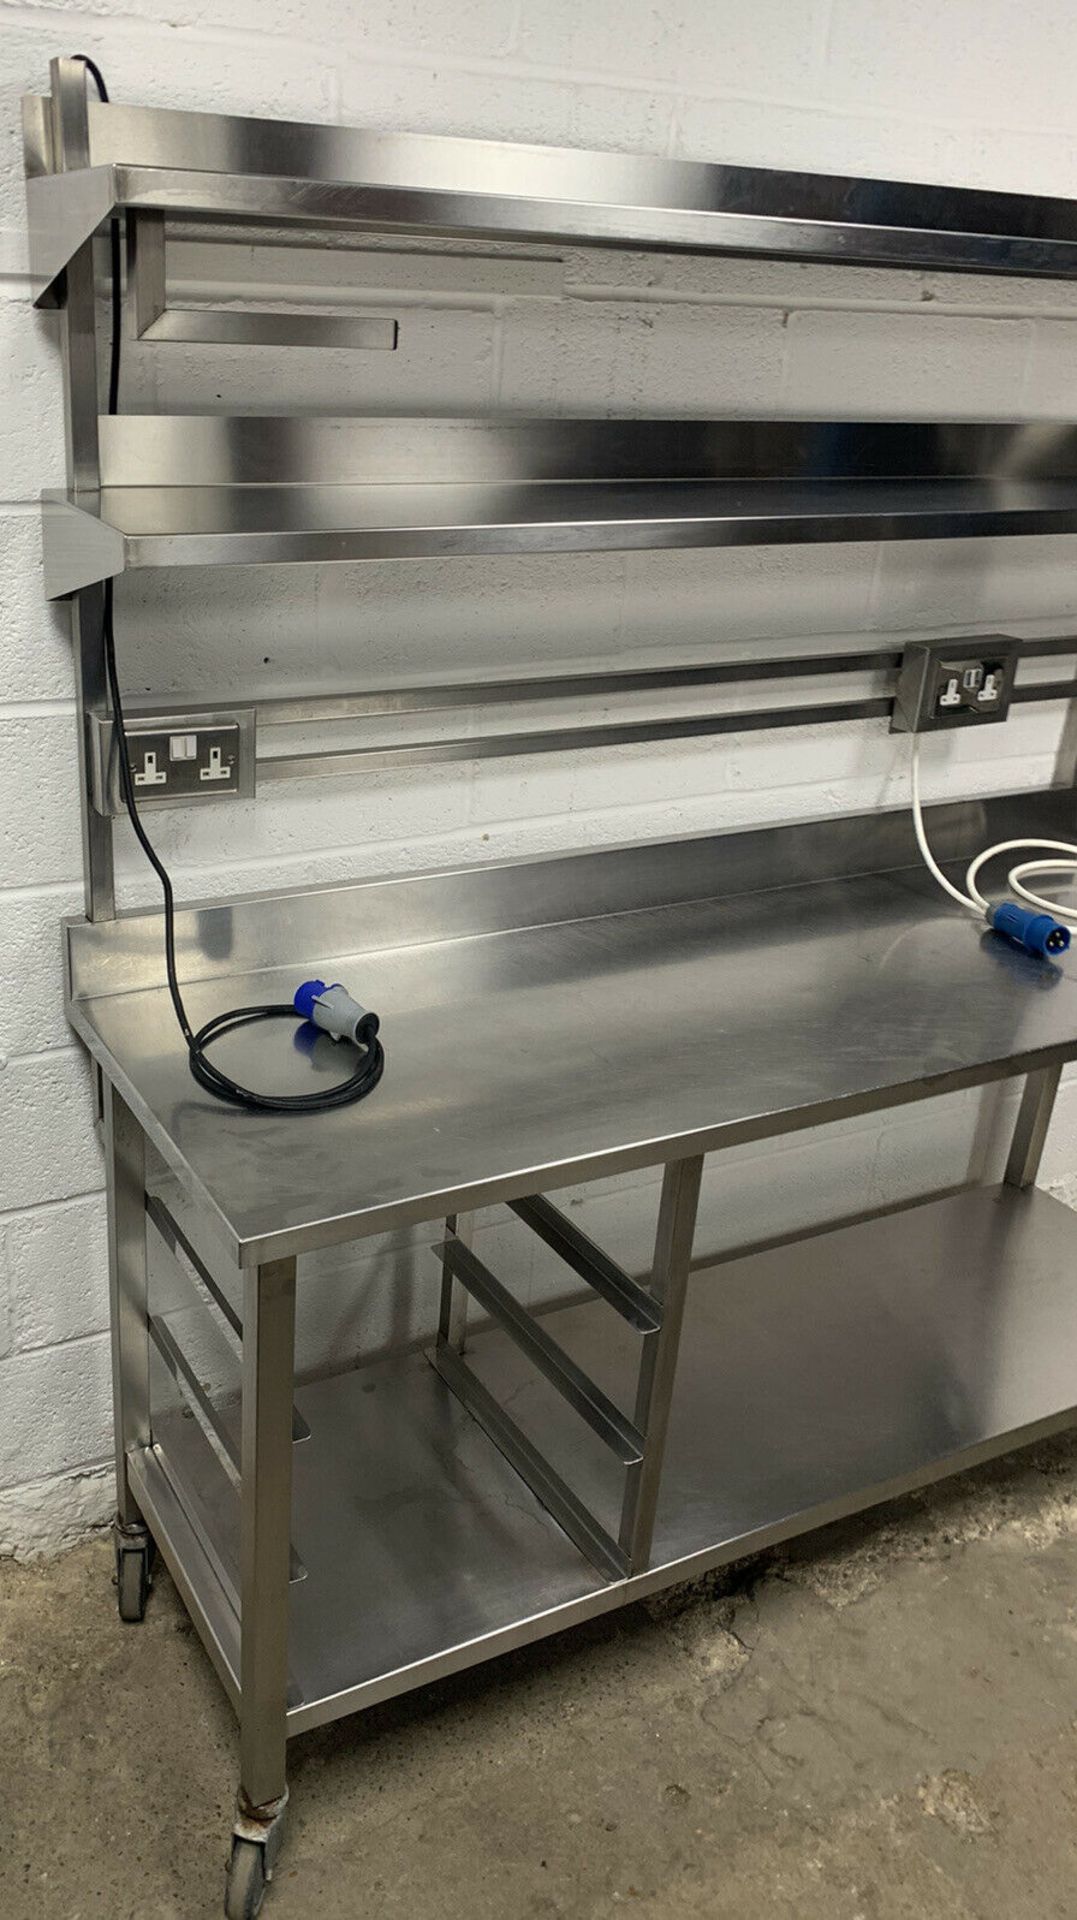 HEAVY DUTY STAINLESS STEEL PREPARATION UNIT WITH SHELVES - Image 3 of 3